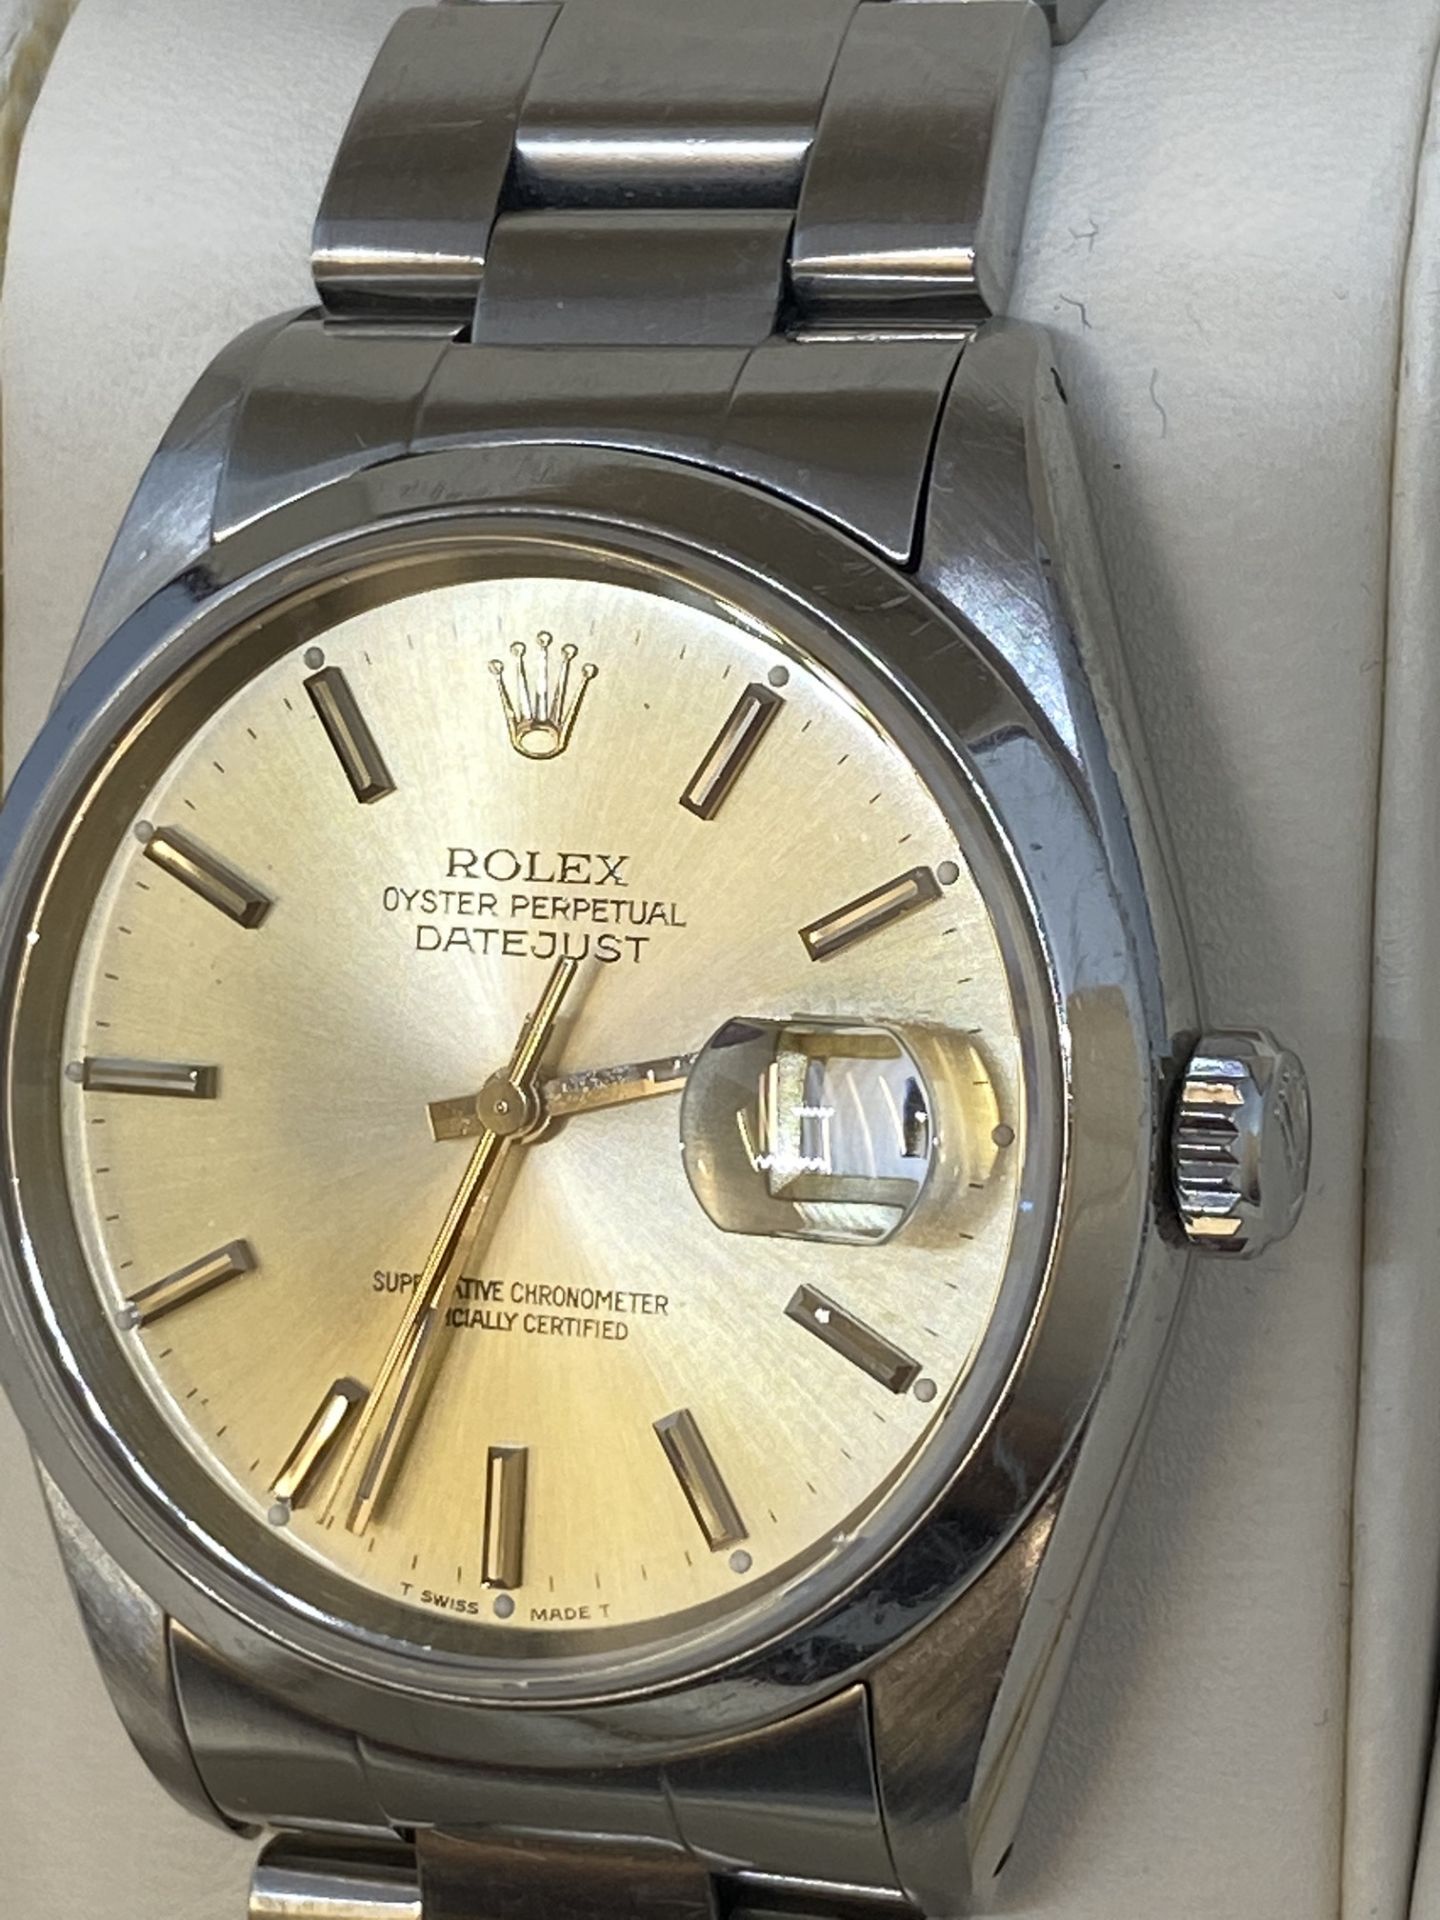 ROLEX STAINLESS STEEL WATCH - Image 3 of 8